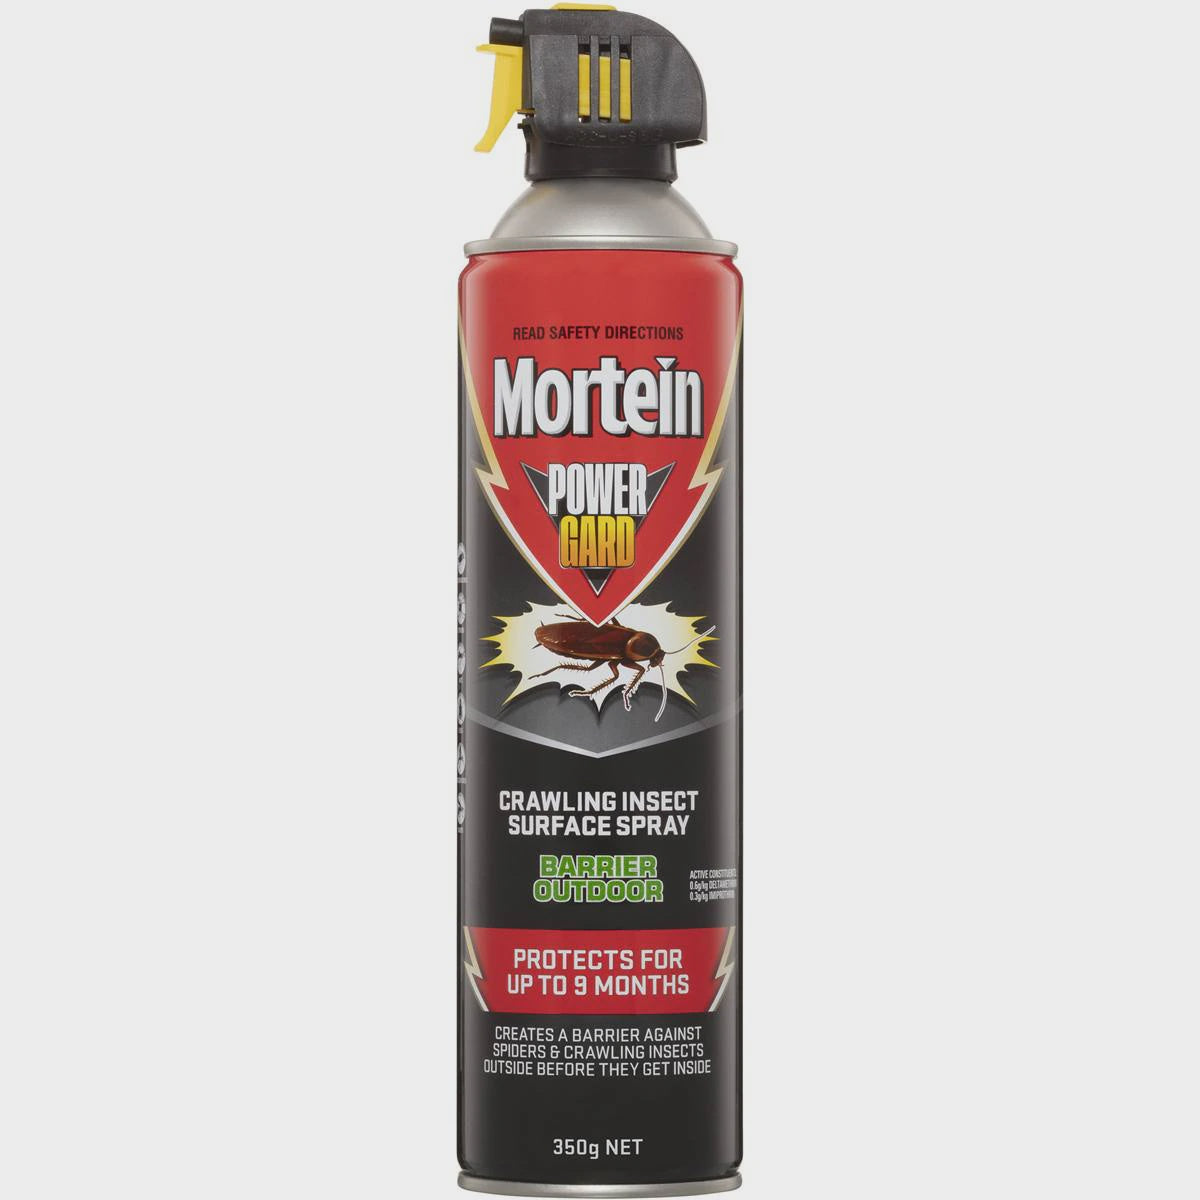 Mortein Powergard Barrier Outdoor Crawling Insect Killer Surface Spray 350g